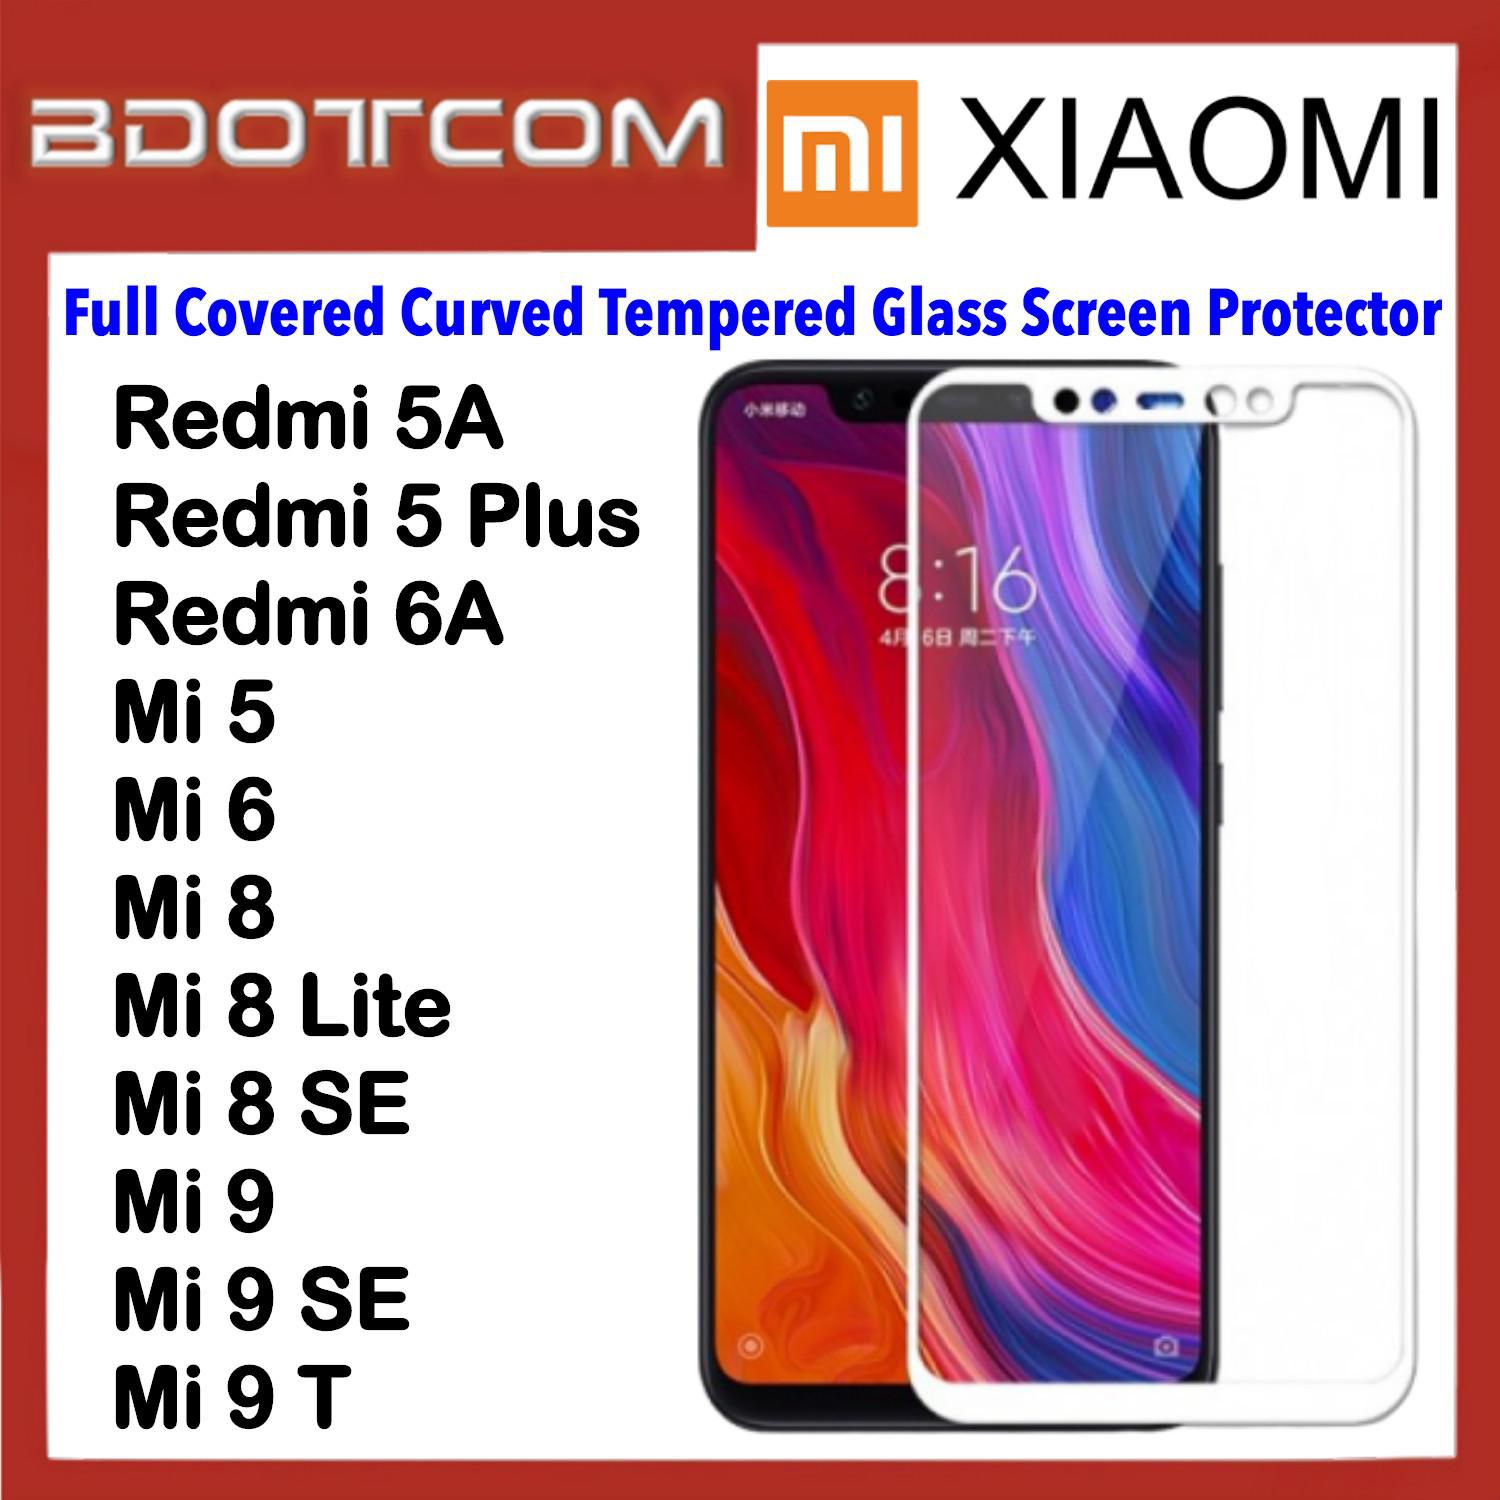 Bdotcom Full Covered Curved Glass Screen Protector for Xiaomi Redmi 5A  (White)